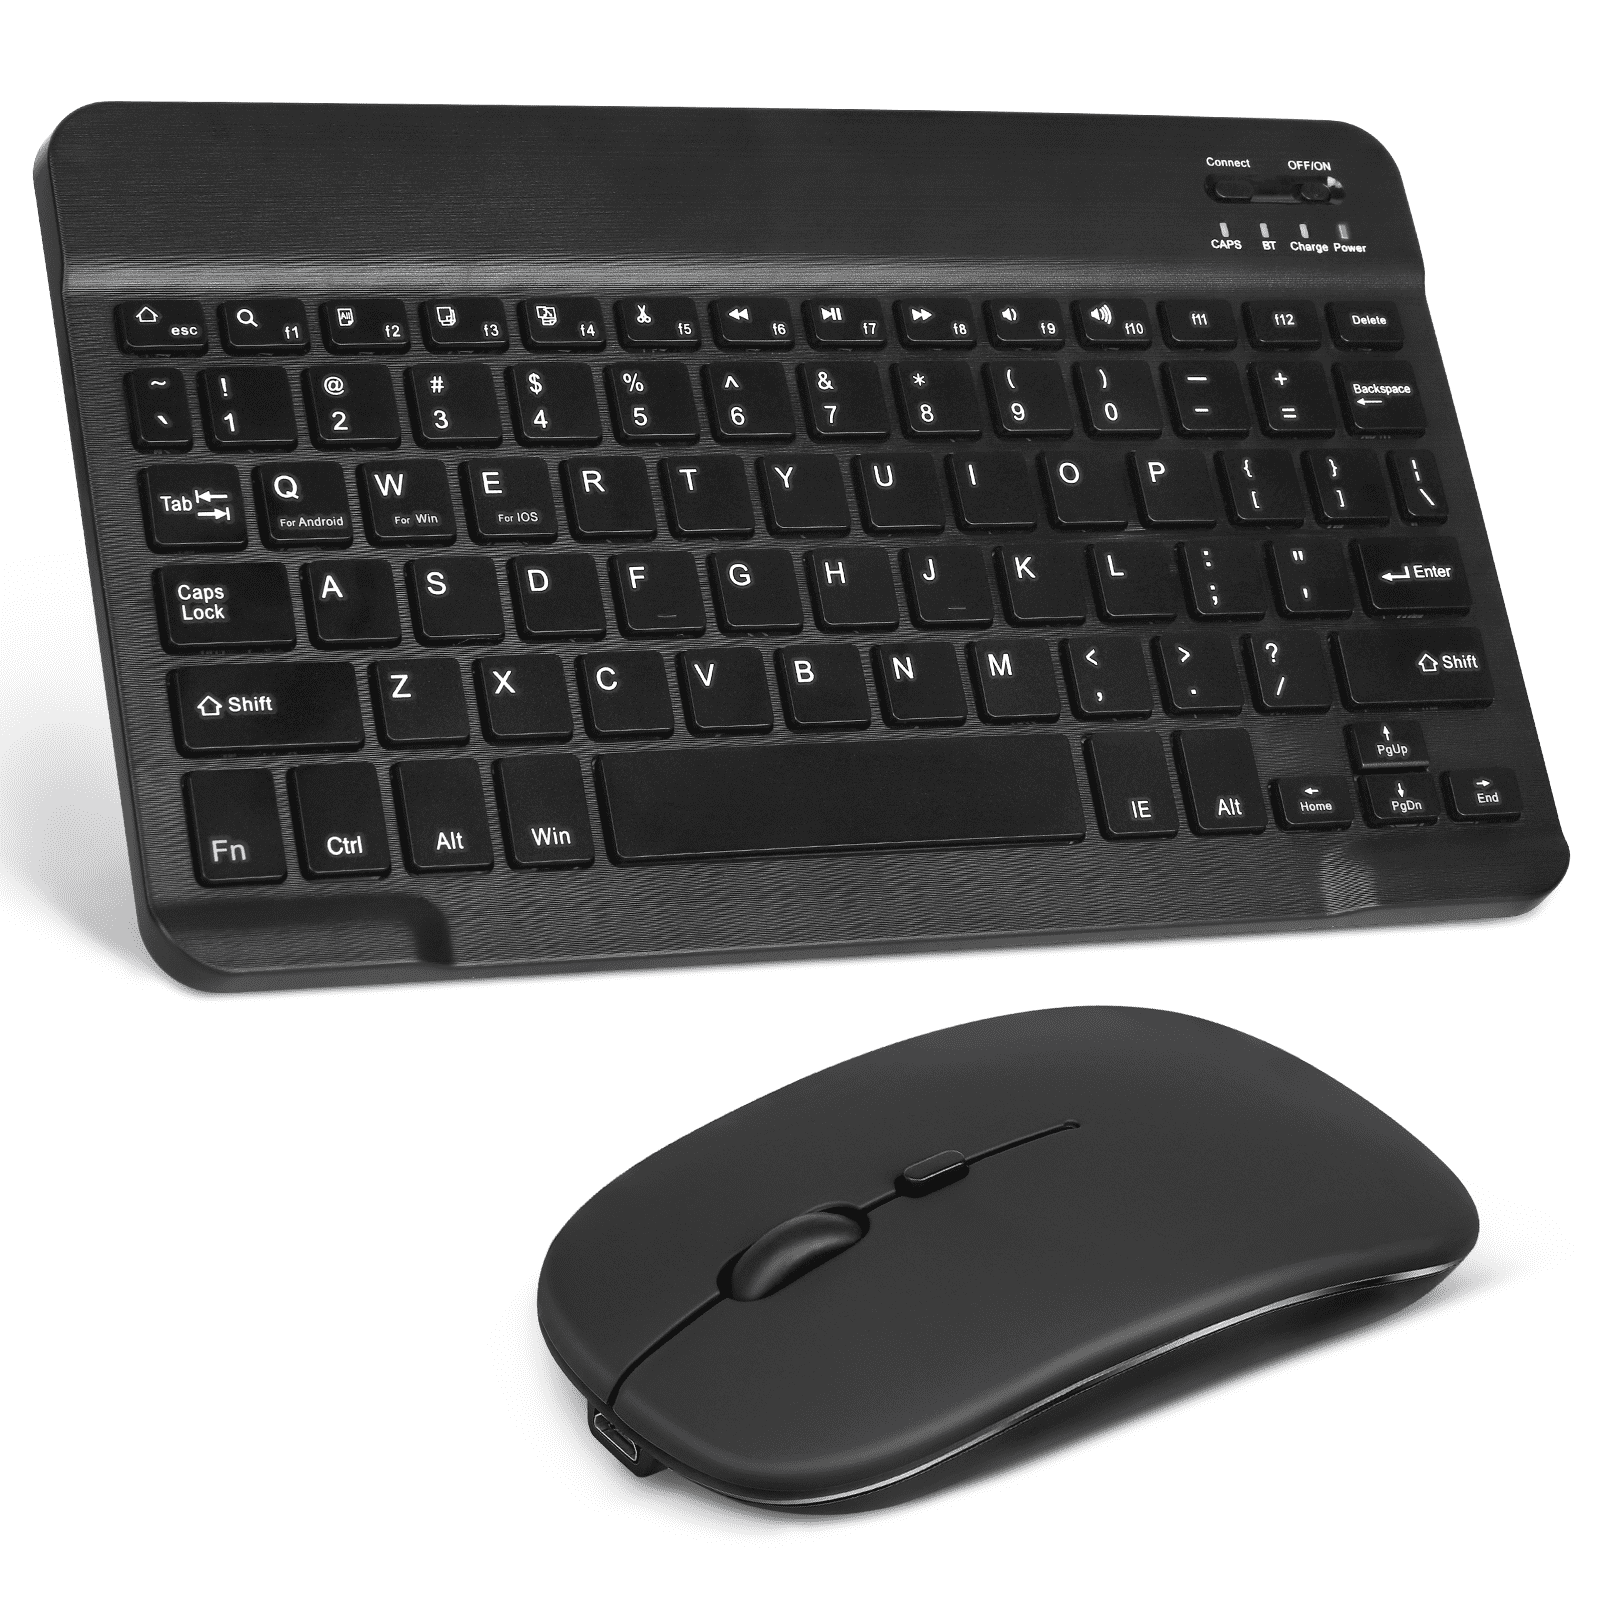 Wireless Mini Keyboard and Mouse for SAMSUNG UE46F6320AY SMART TV BK HS 